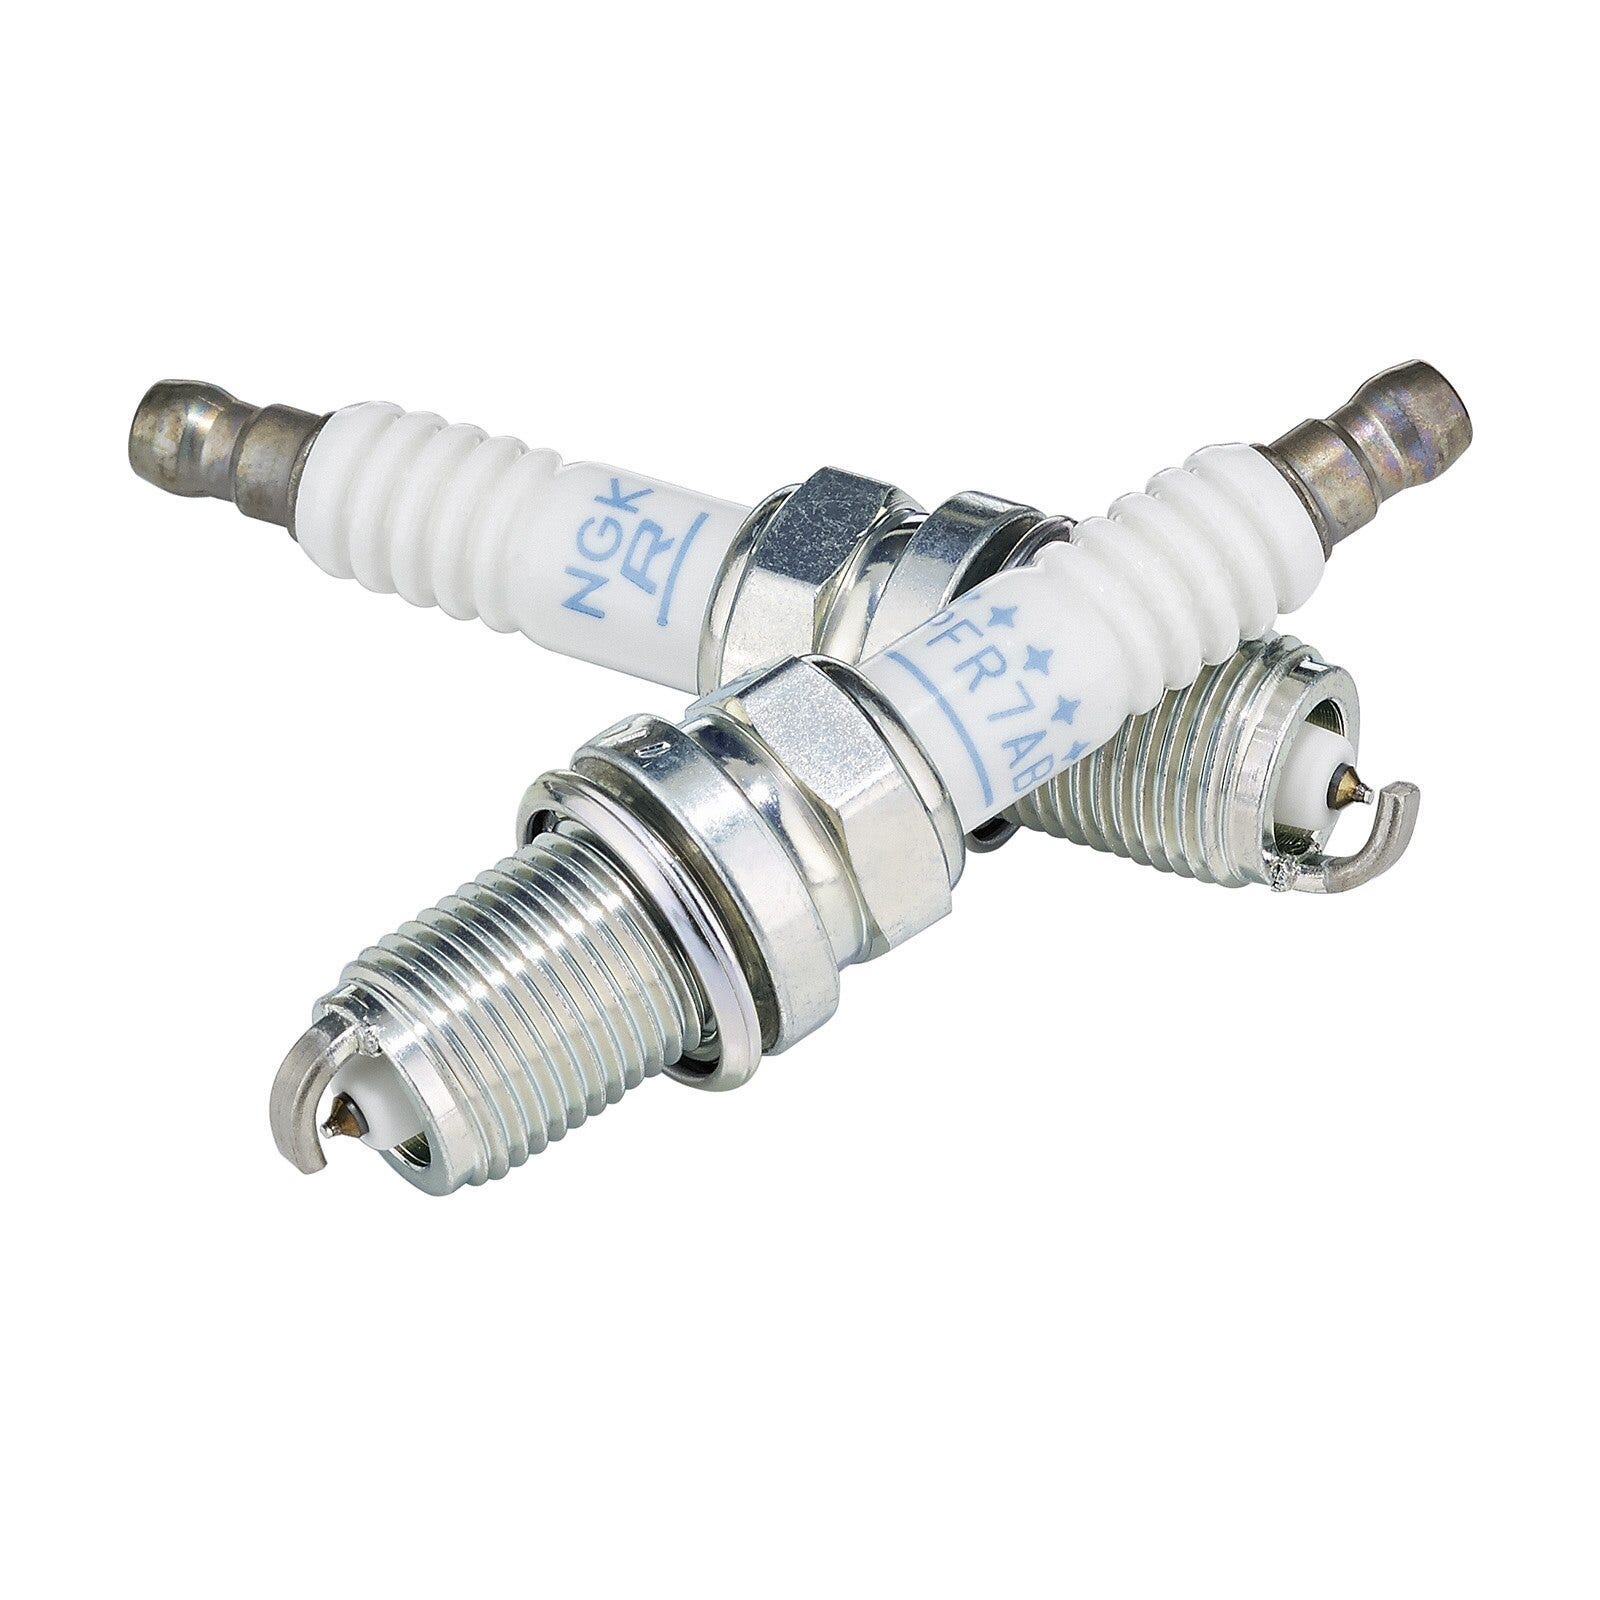 NGK Spark Plugs - 415129429 - The Parts Lodge